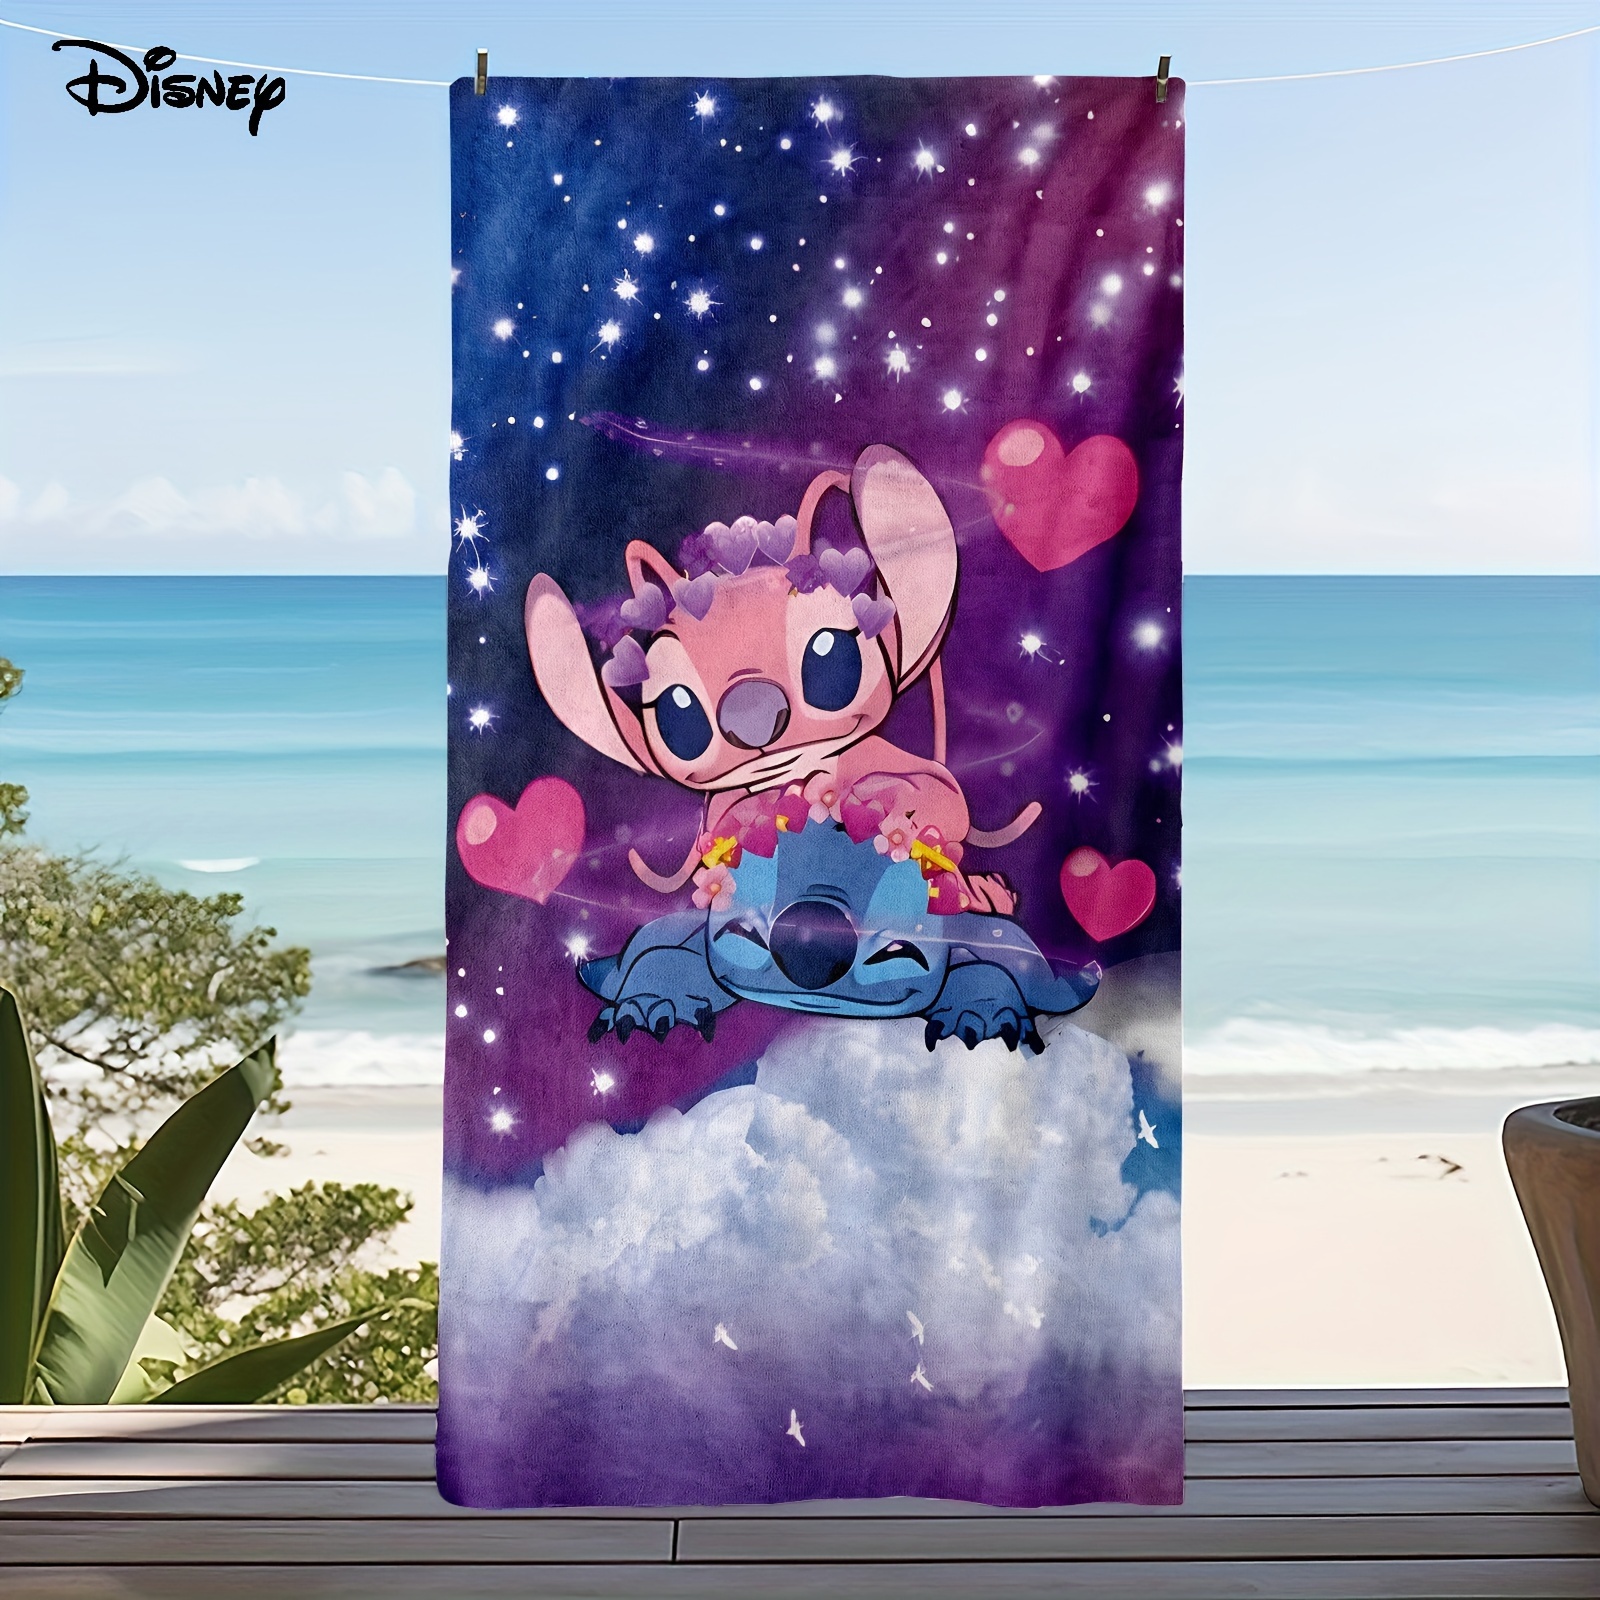 

1pc Stitch & Anna Beach Towel, Super Absorbent & Quick-drying Swimming Towel, Lightweight & Soft Beach Blanket, Suitable For Beach Swimming Outdoor Camping Travel, Ideal Beach Essentials